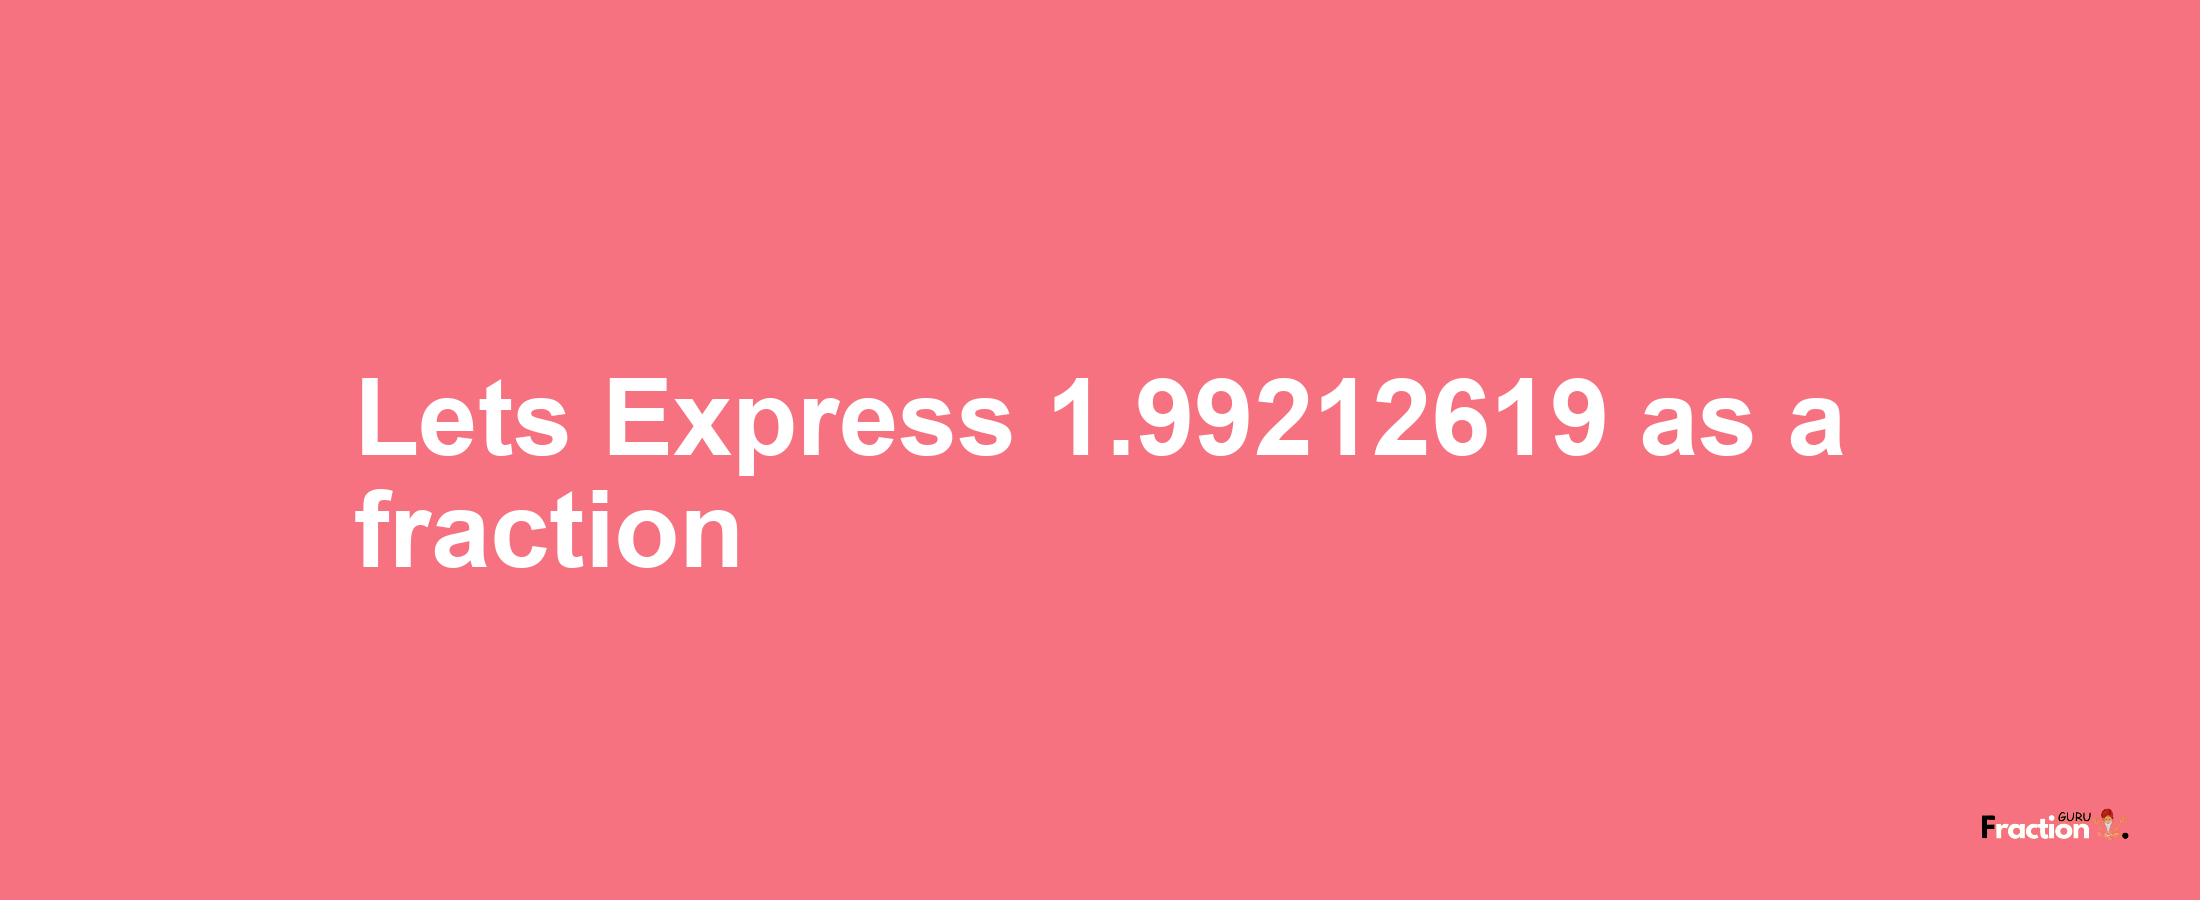 Lets Express 1.99212619 as afraction